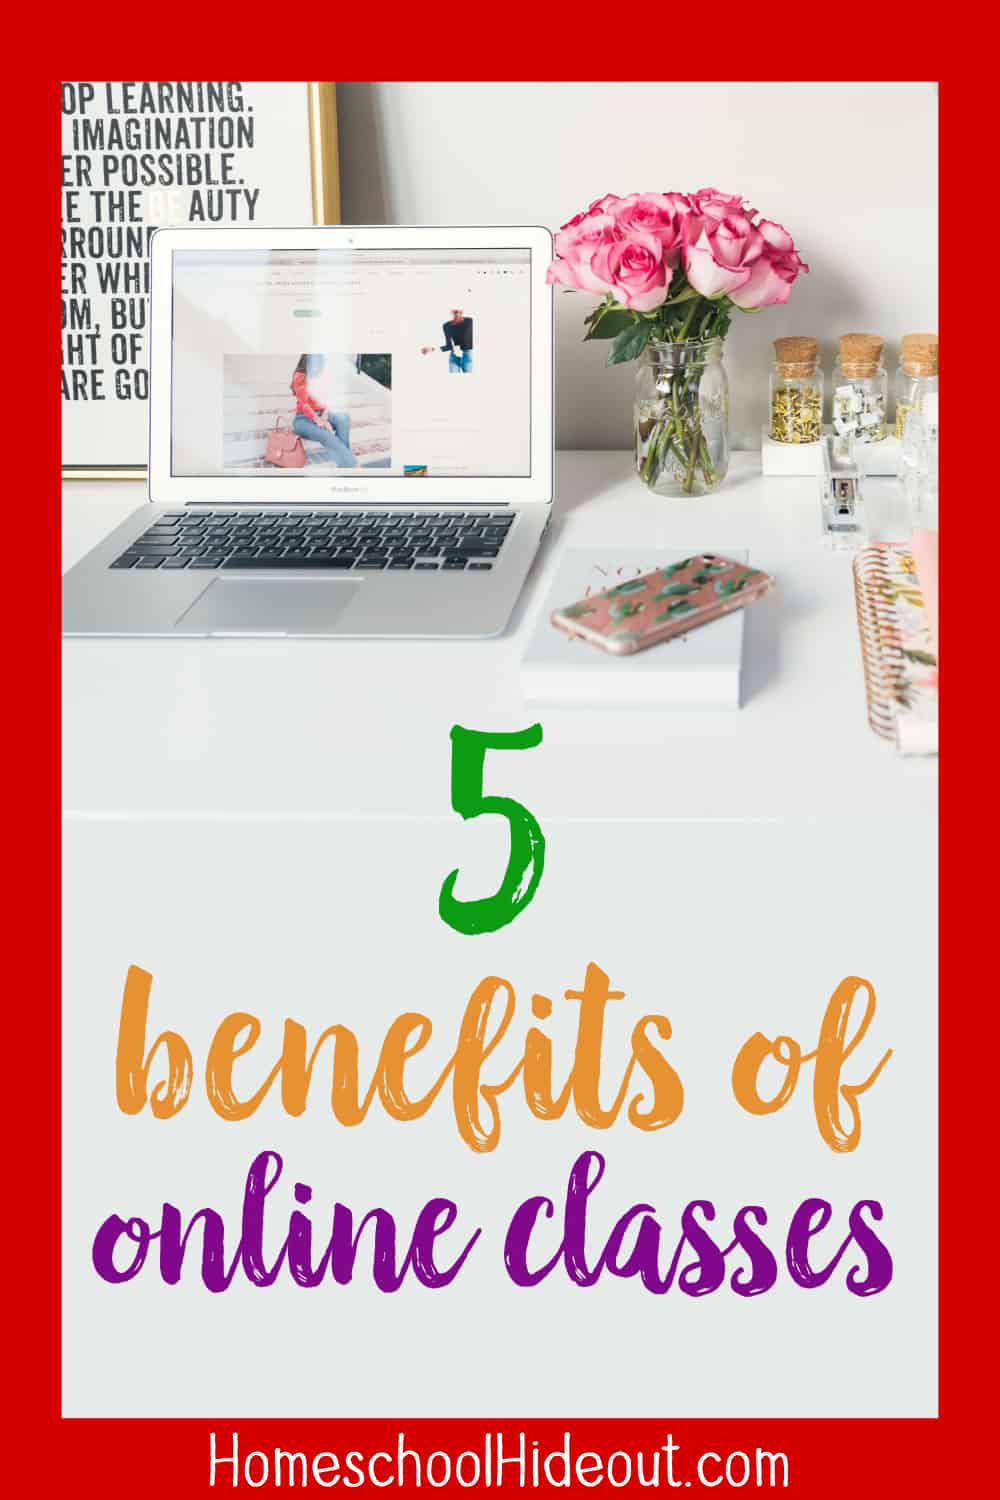 The benefits of online classes have never been greater! Learning from home is the new face of education.